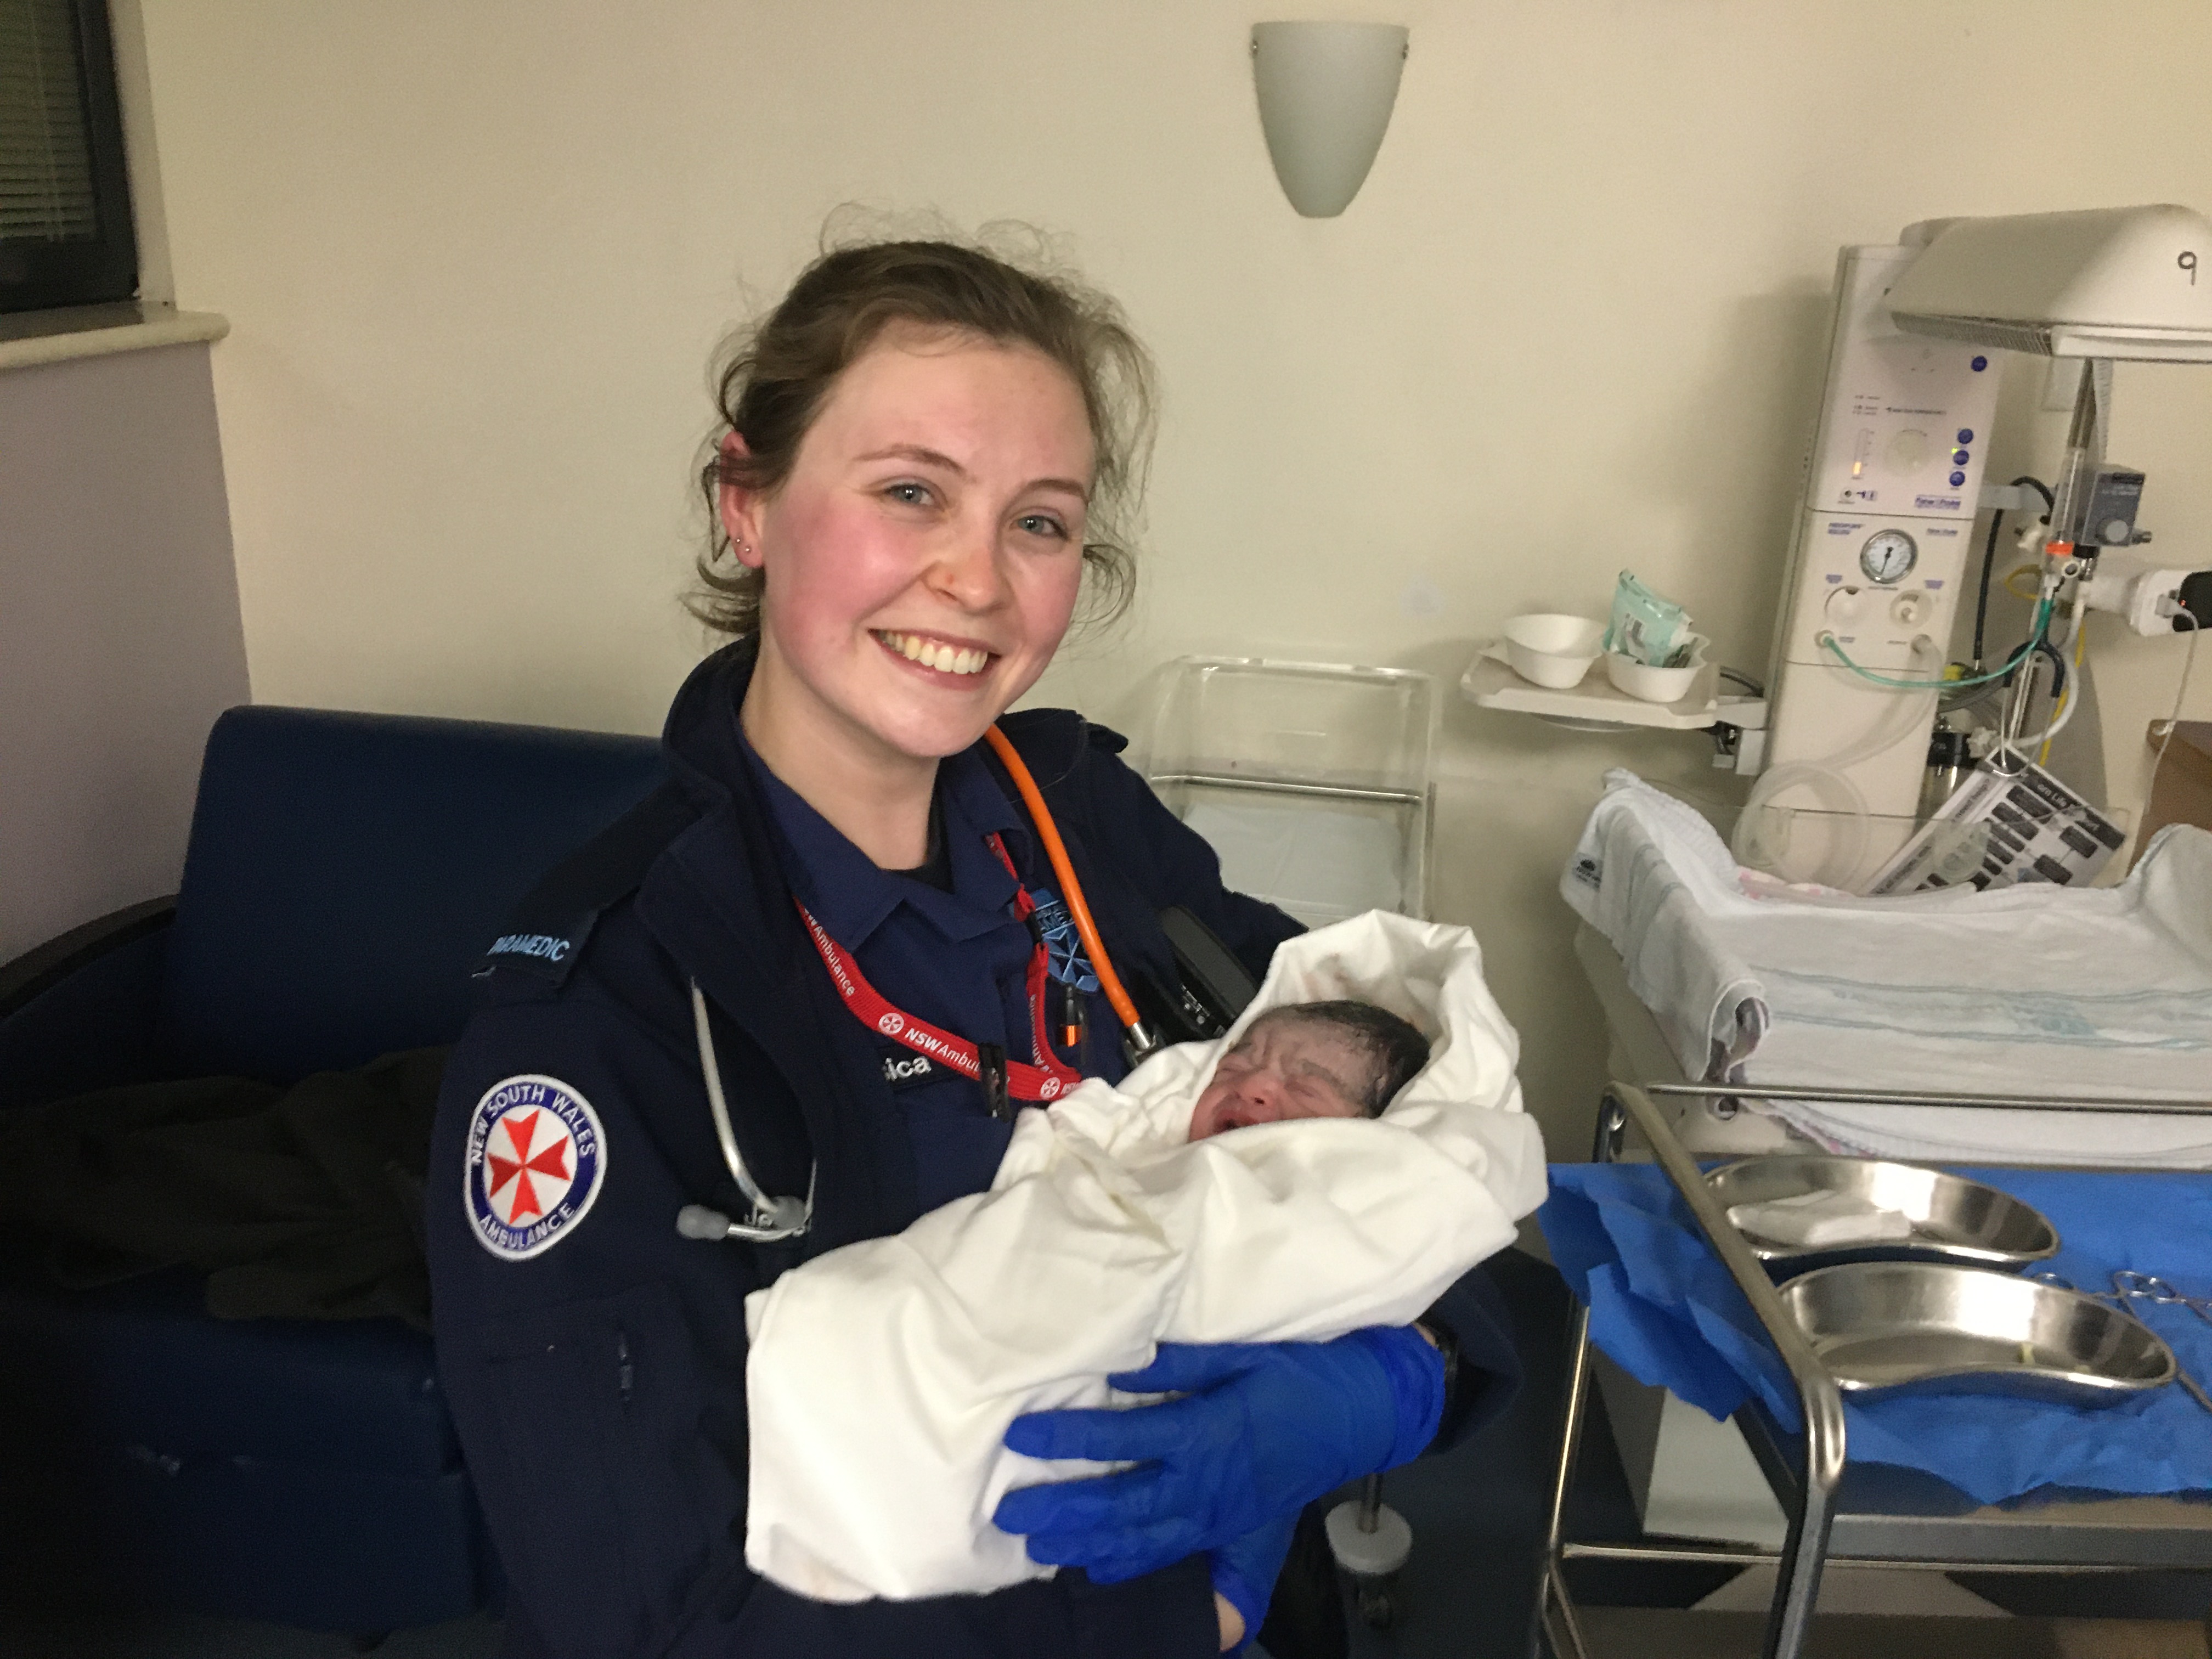 EXCLUSIVE | Baby’s dramatic entrance into the world makes a young paramedic’s dream come true